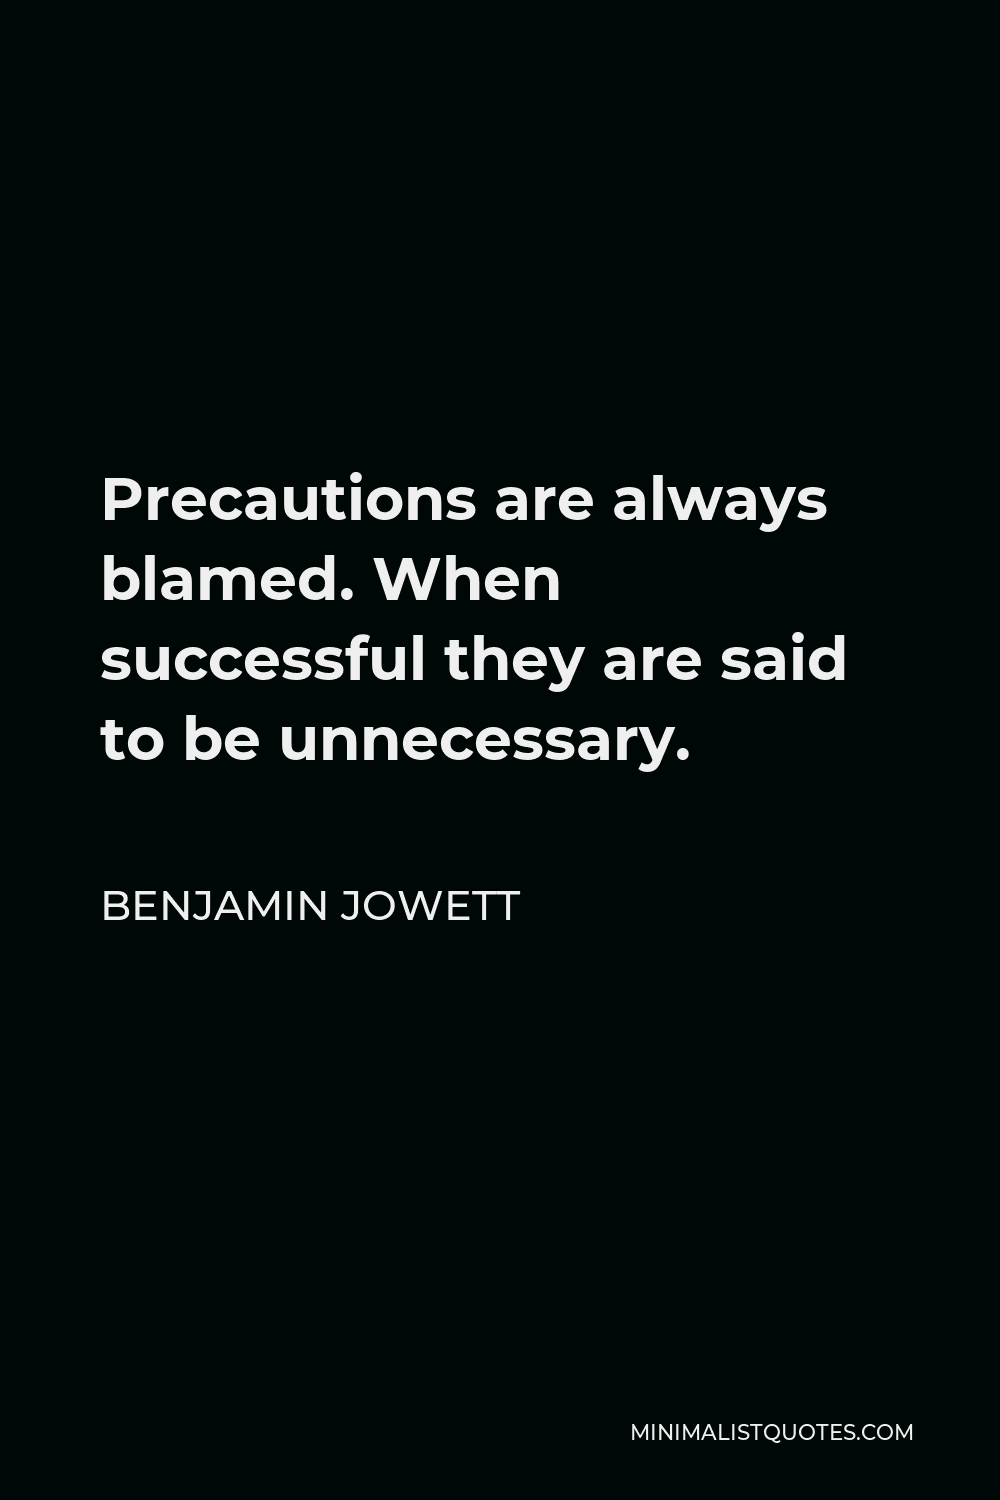 Benjamin Jowett Quote - Precautions are always blamed. When successful they are said to be unnecessary.